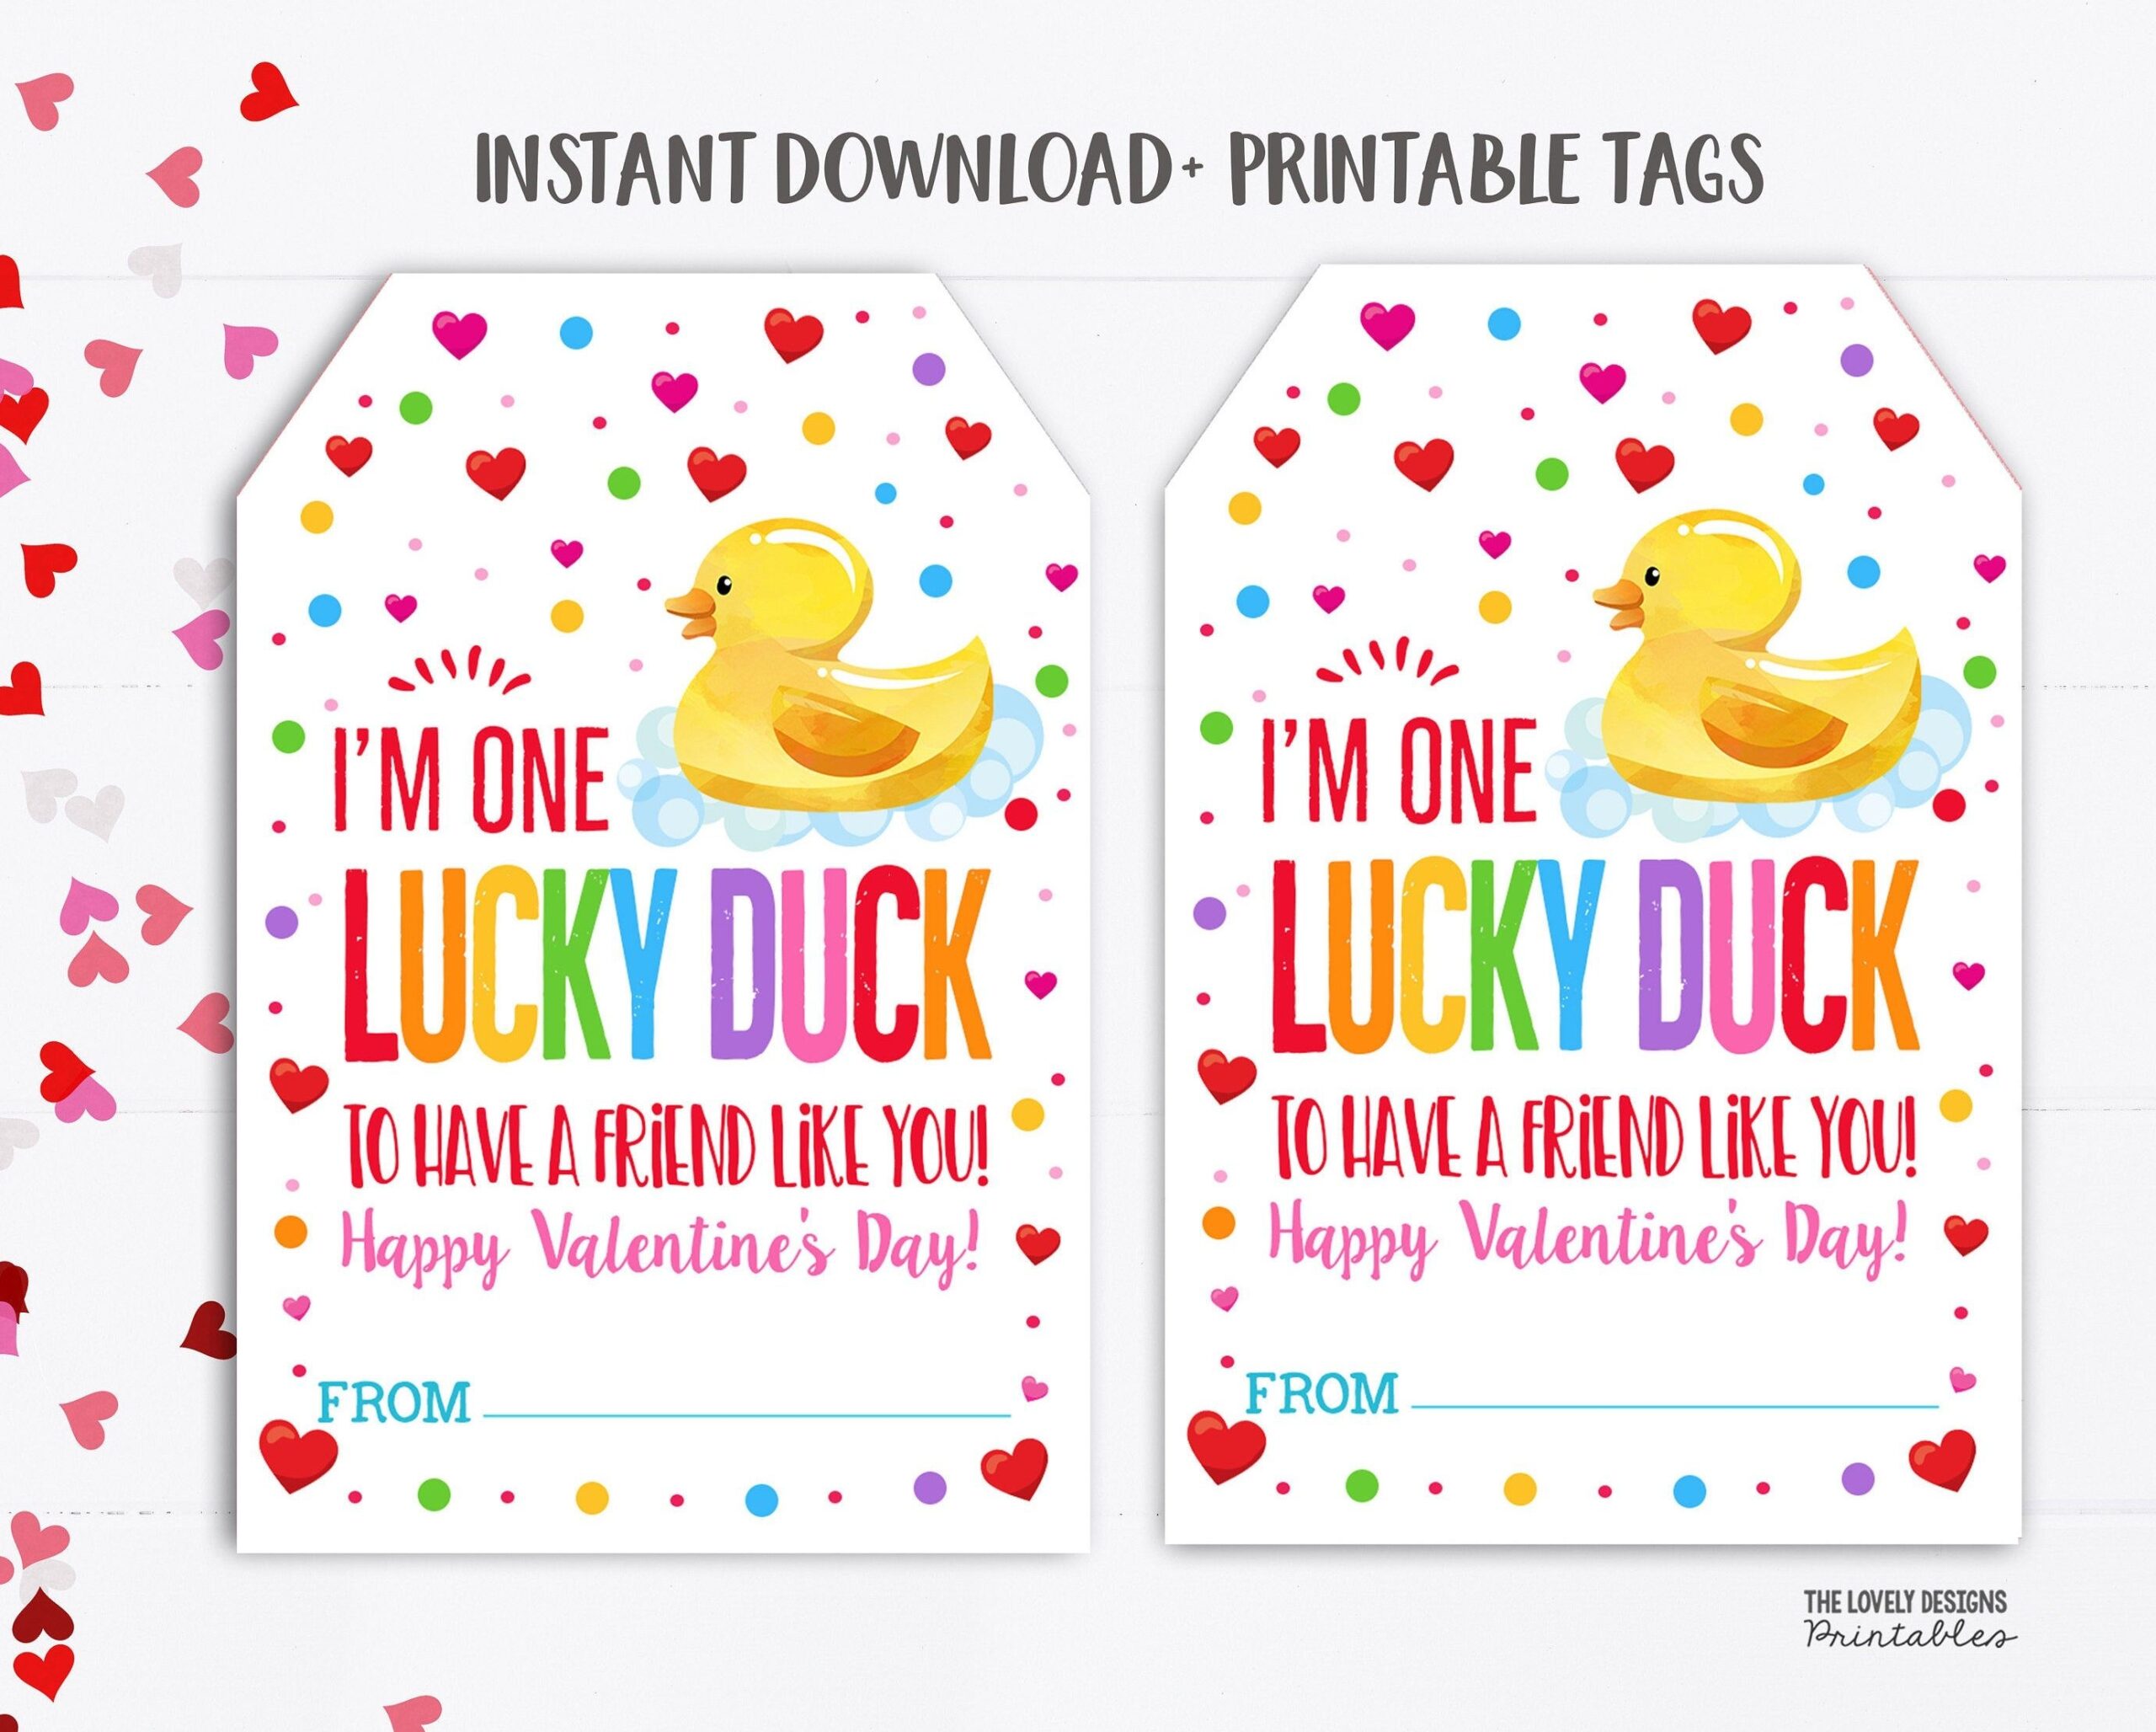 Rubber Duck Valentine s Day Gift Tags Valentine Lucky Duck Tag Printable Ducky Duckie Non Candy Preschool Class Printable Kids Valentine Tag Etsy School Valentine Cards Valentine Tags Valentines School